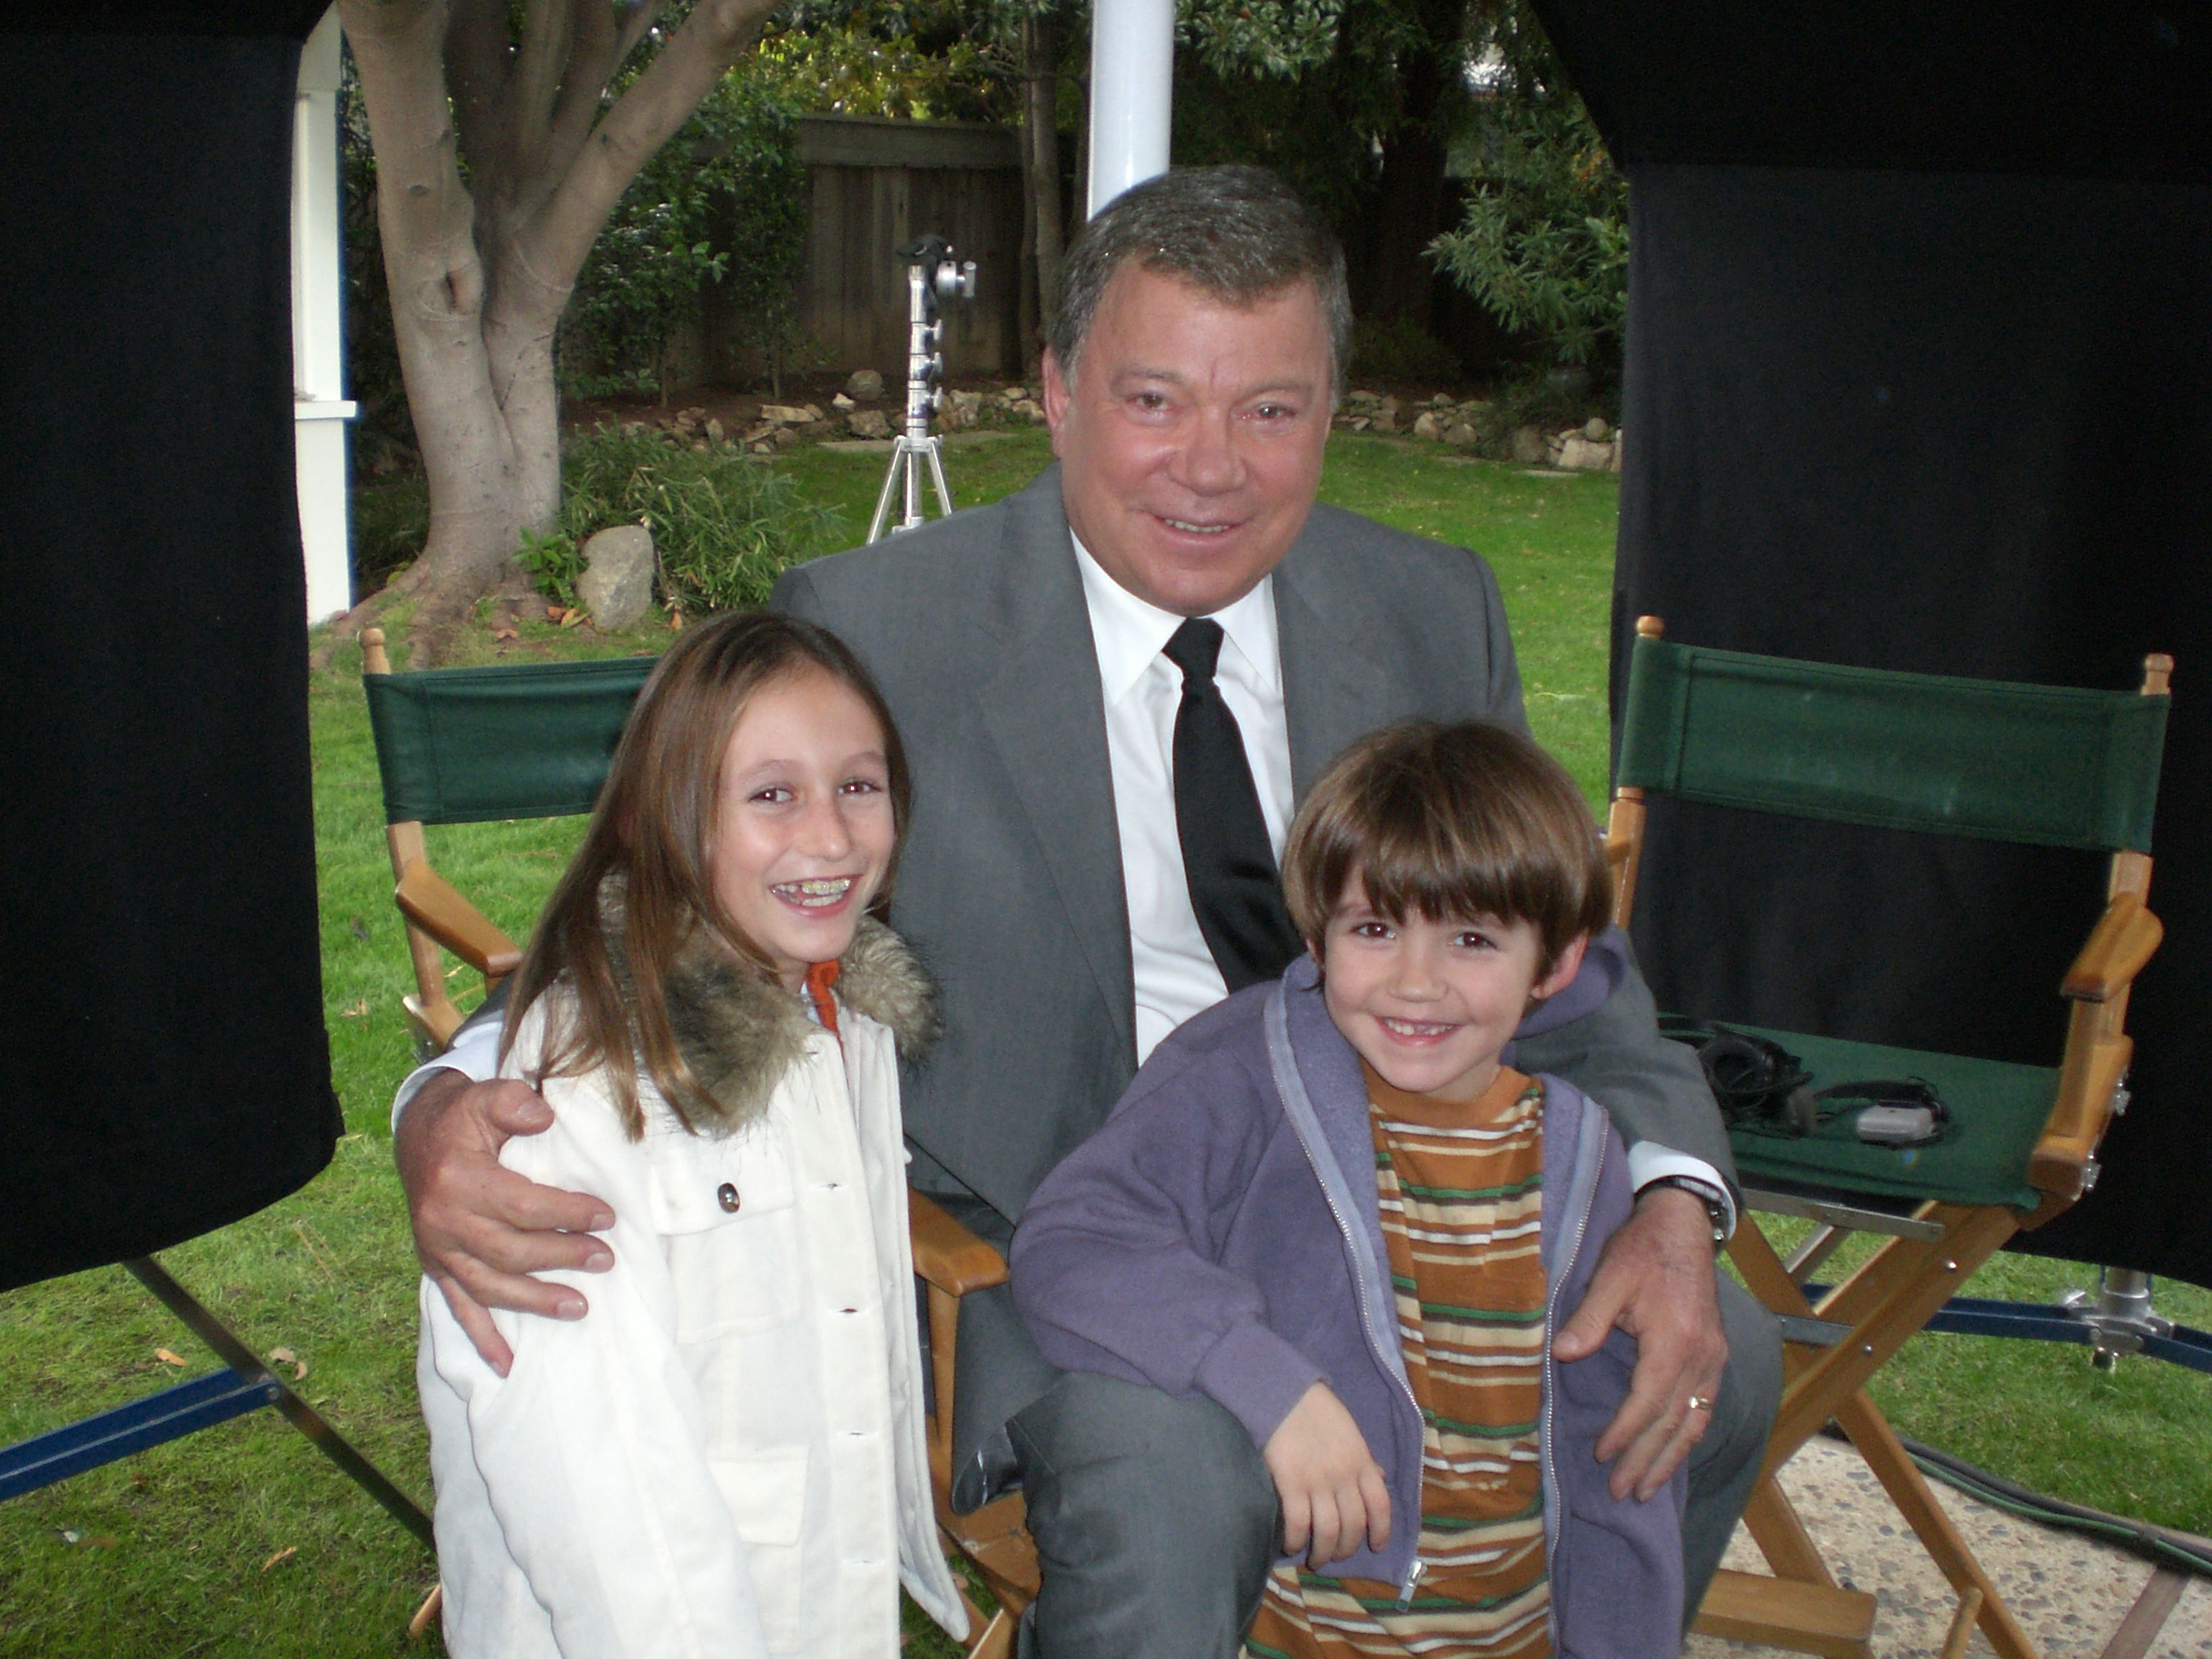 Working with William Shatner